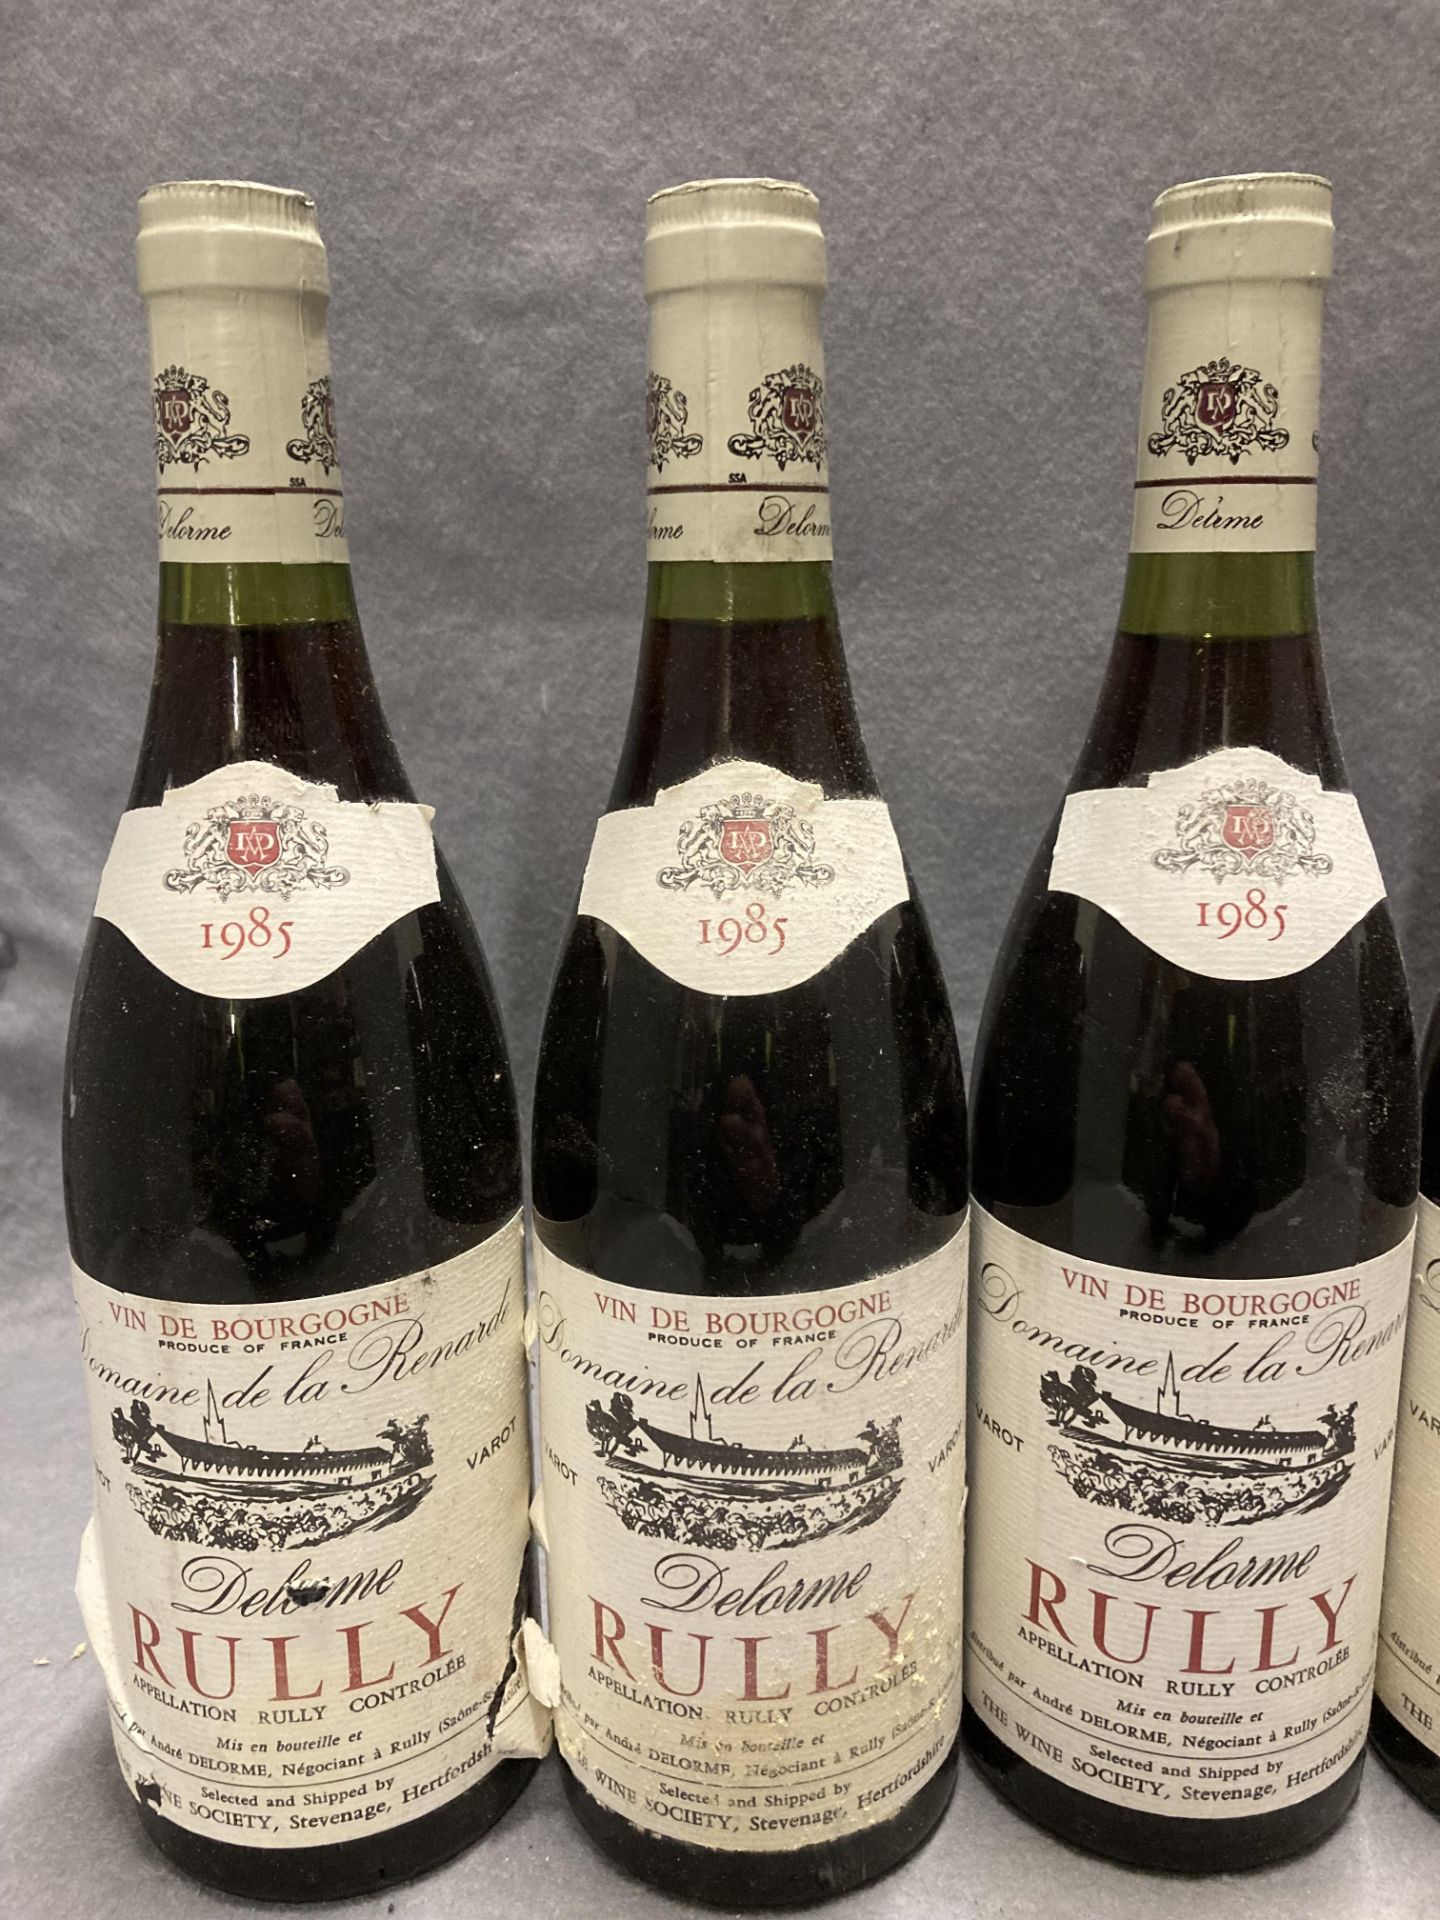 Six 75cl bottles of Domaine de la Renarde Delarme Rully 1985 red wine - advised stored in a cellar - Image 2 of 3